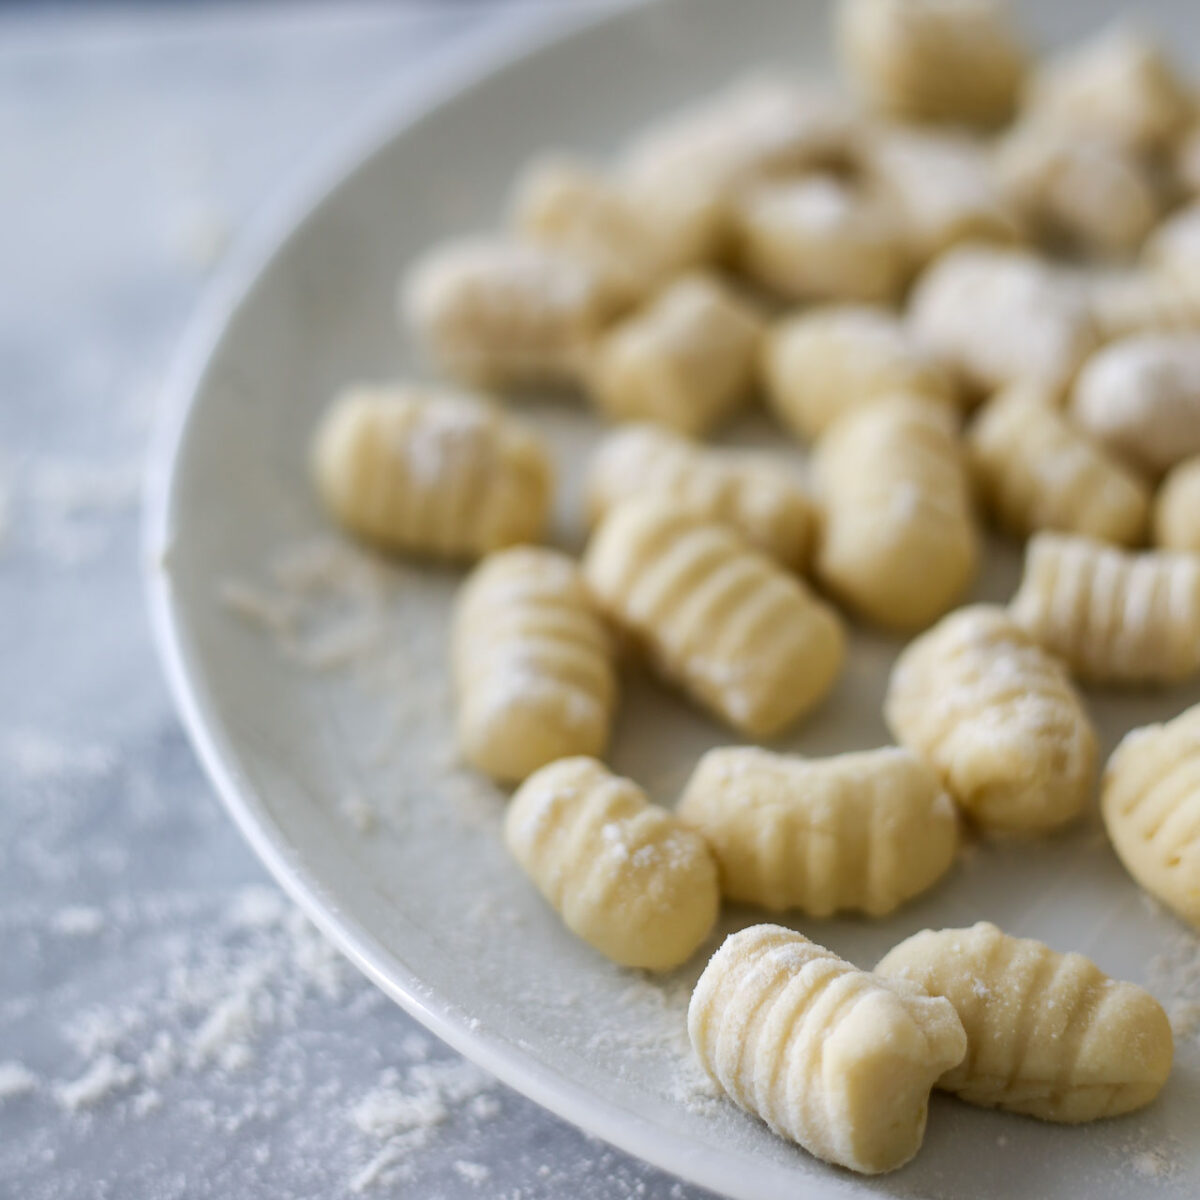 A plate filled with uncooked gnocchi.